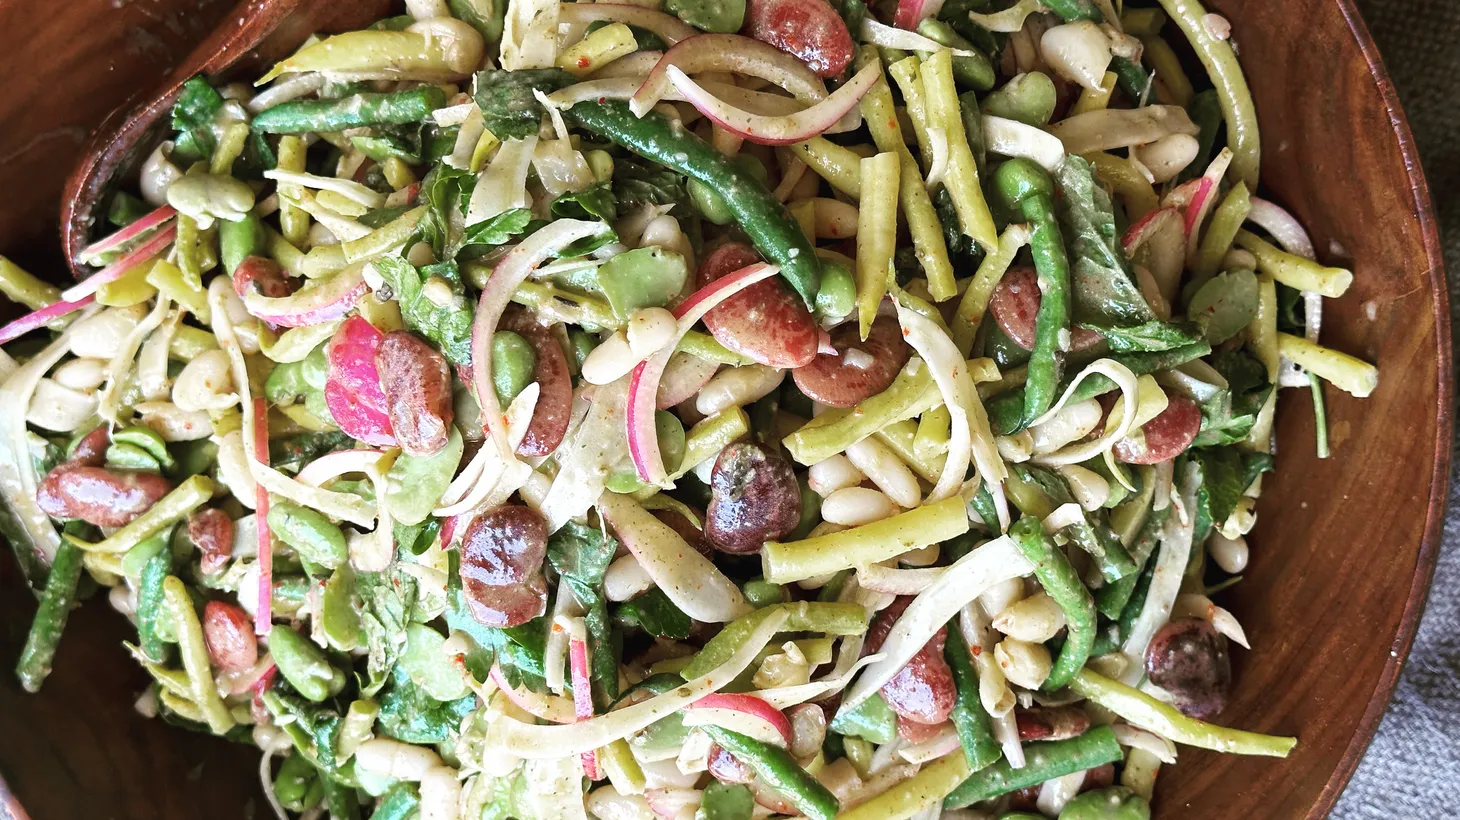 Fresh blue lake green beans and yellow wax beans are blanched and combined with cooked dried varieties for a seasonal bean salad.